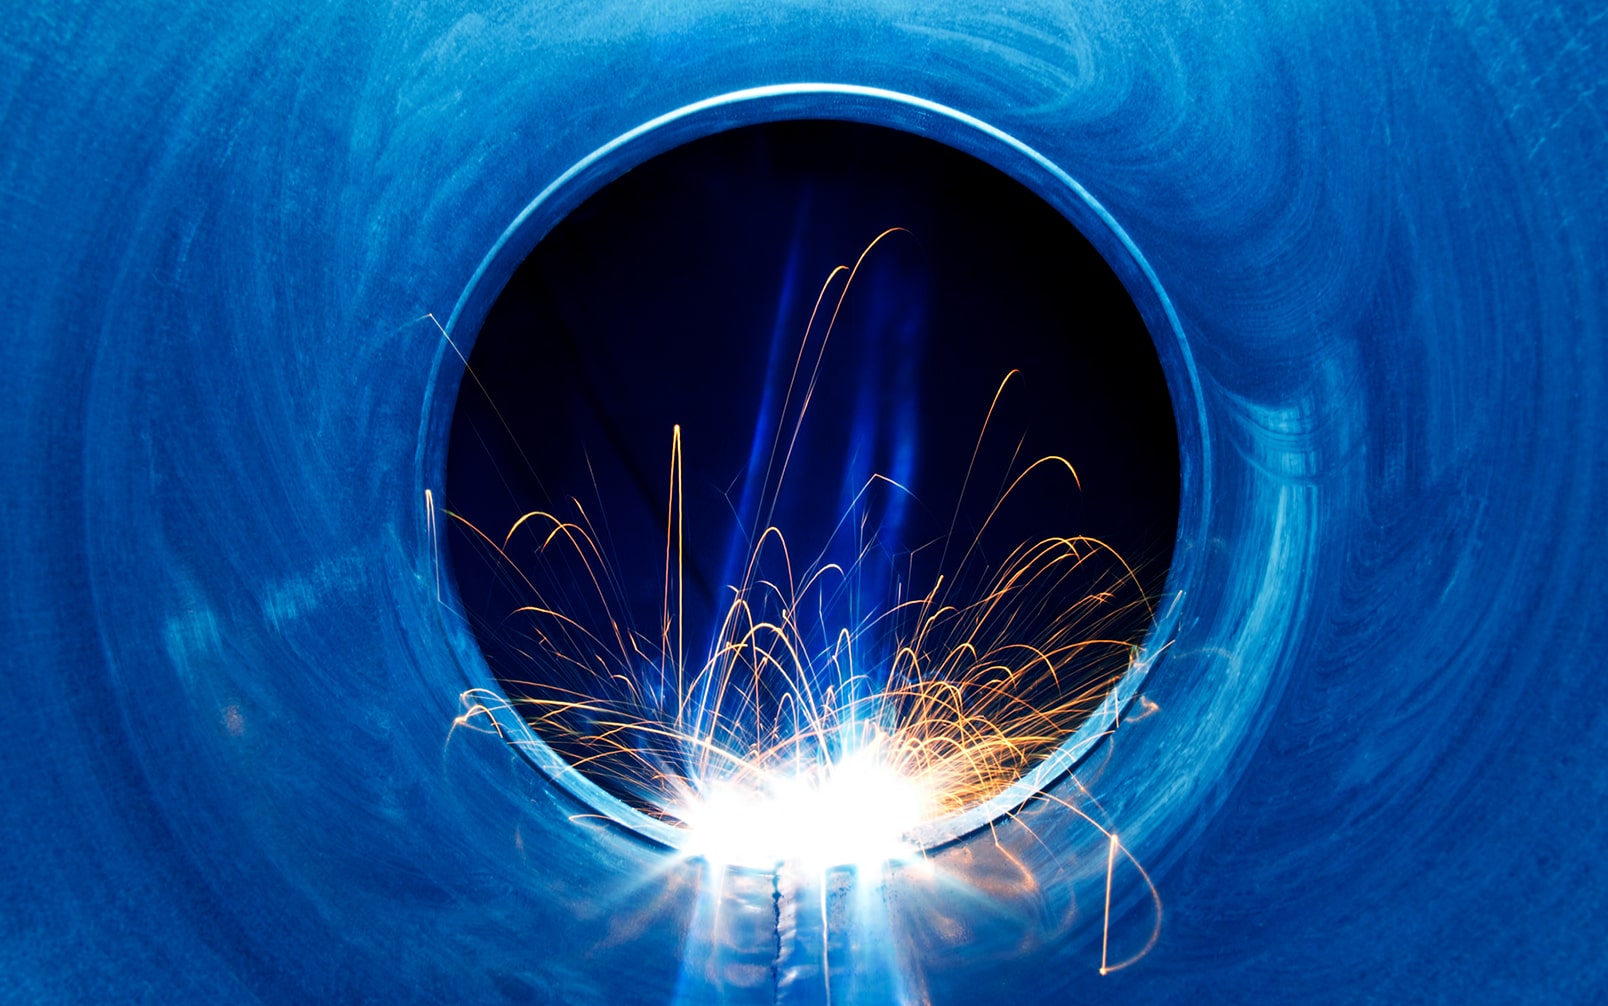 Image of some sparks in a metal tube